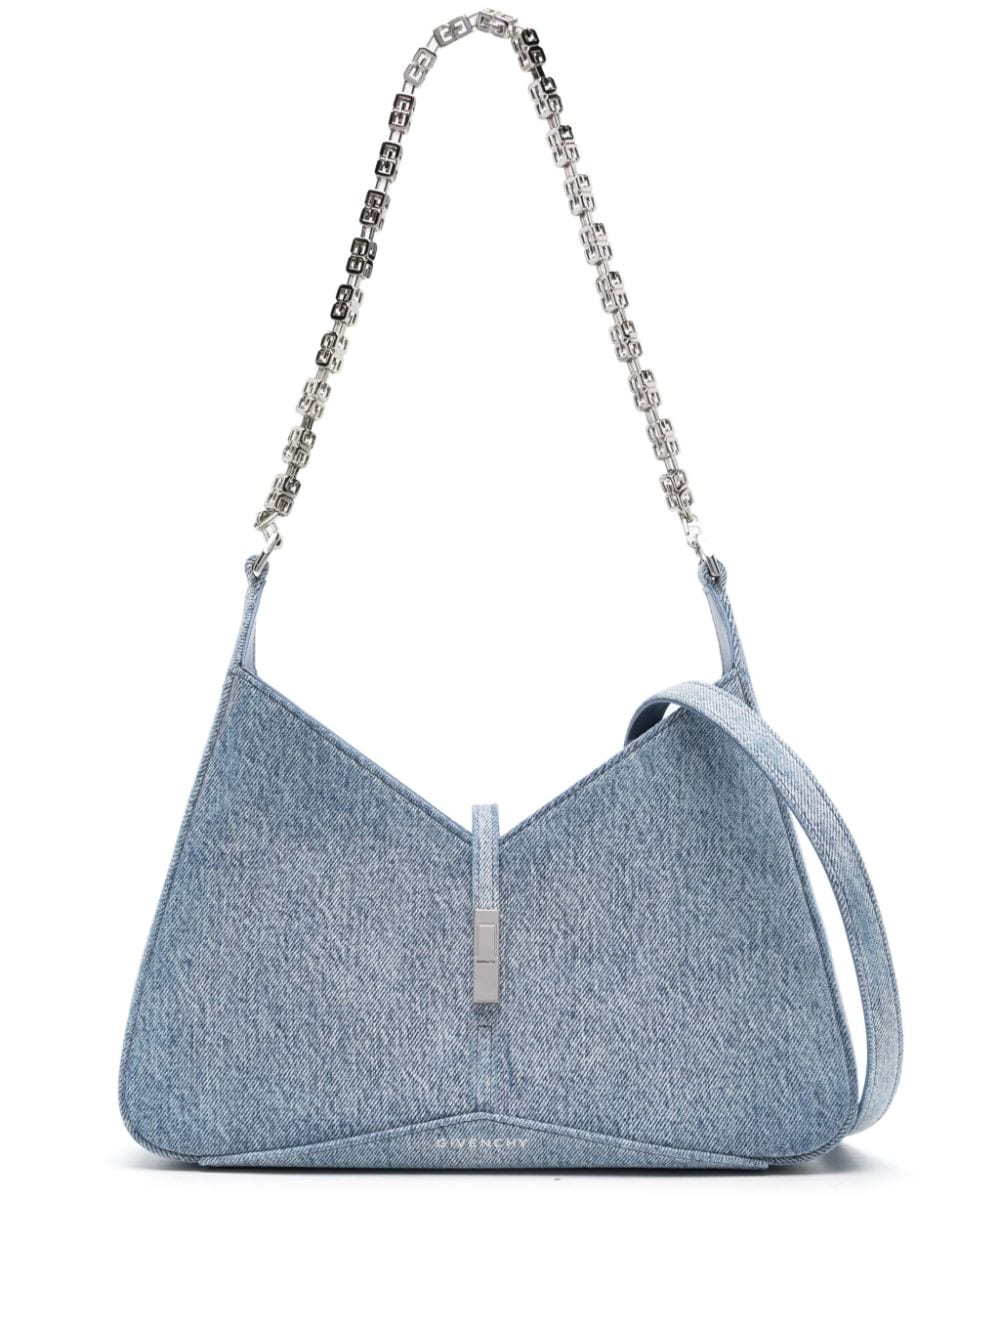 Givenchy small Cut Out shoulder bag - Blue von Givenchy